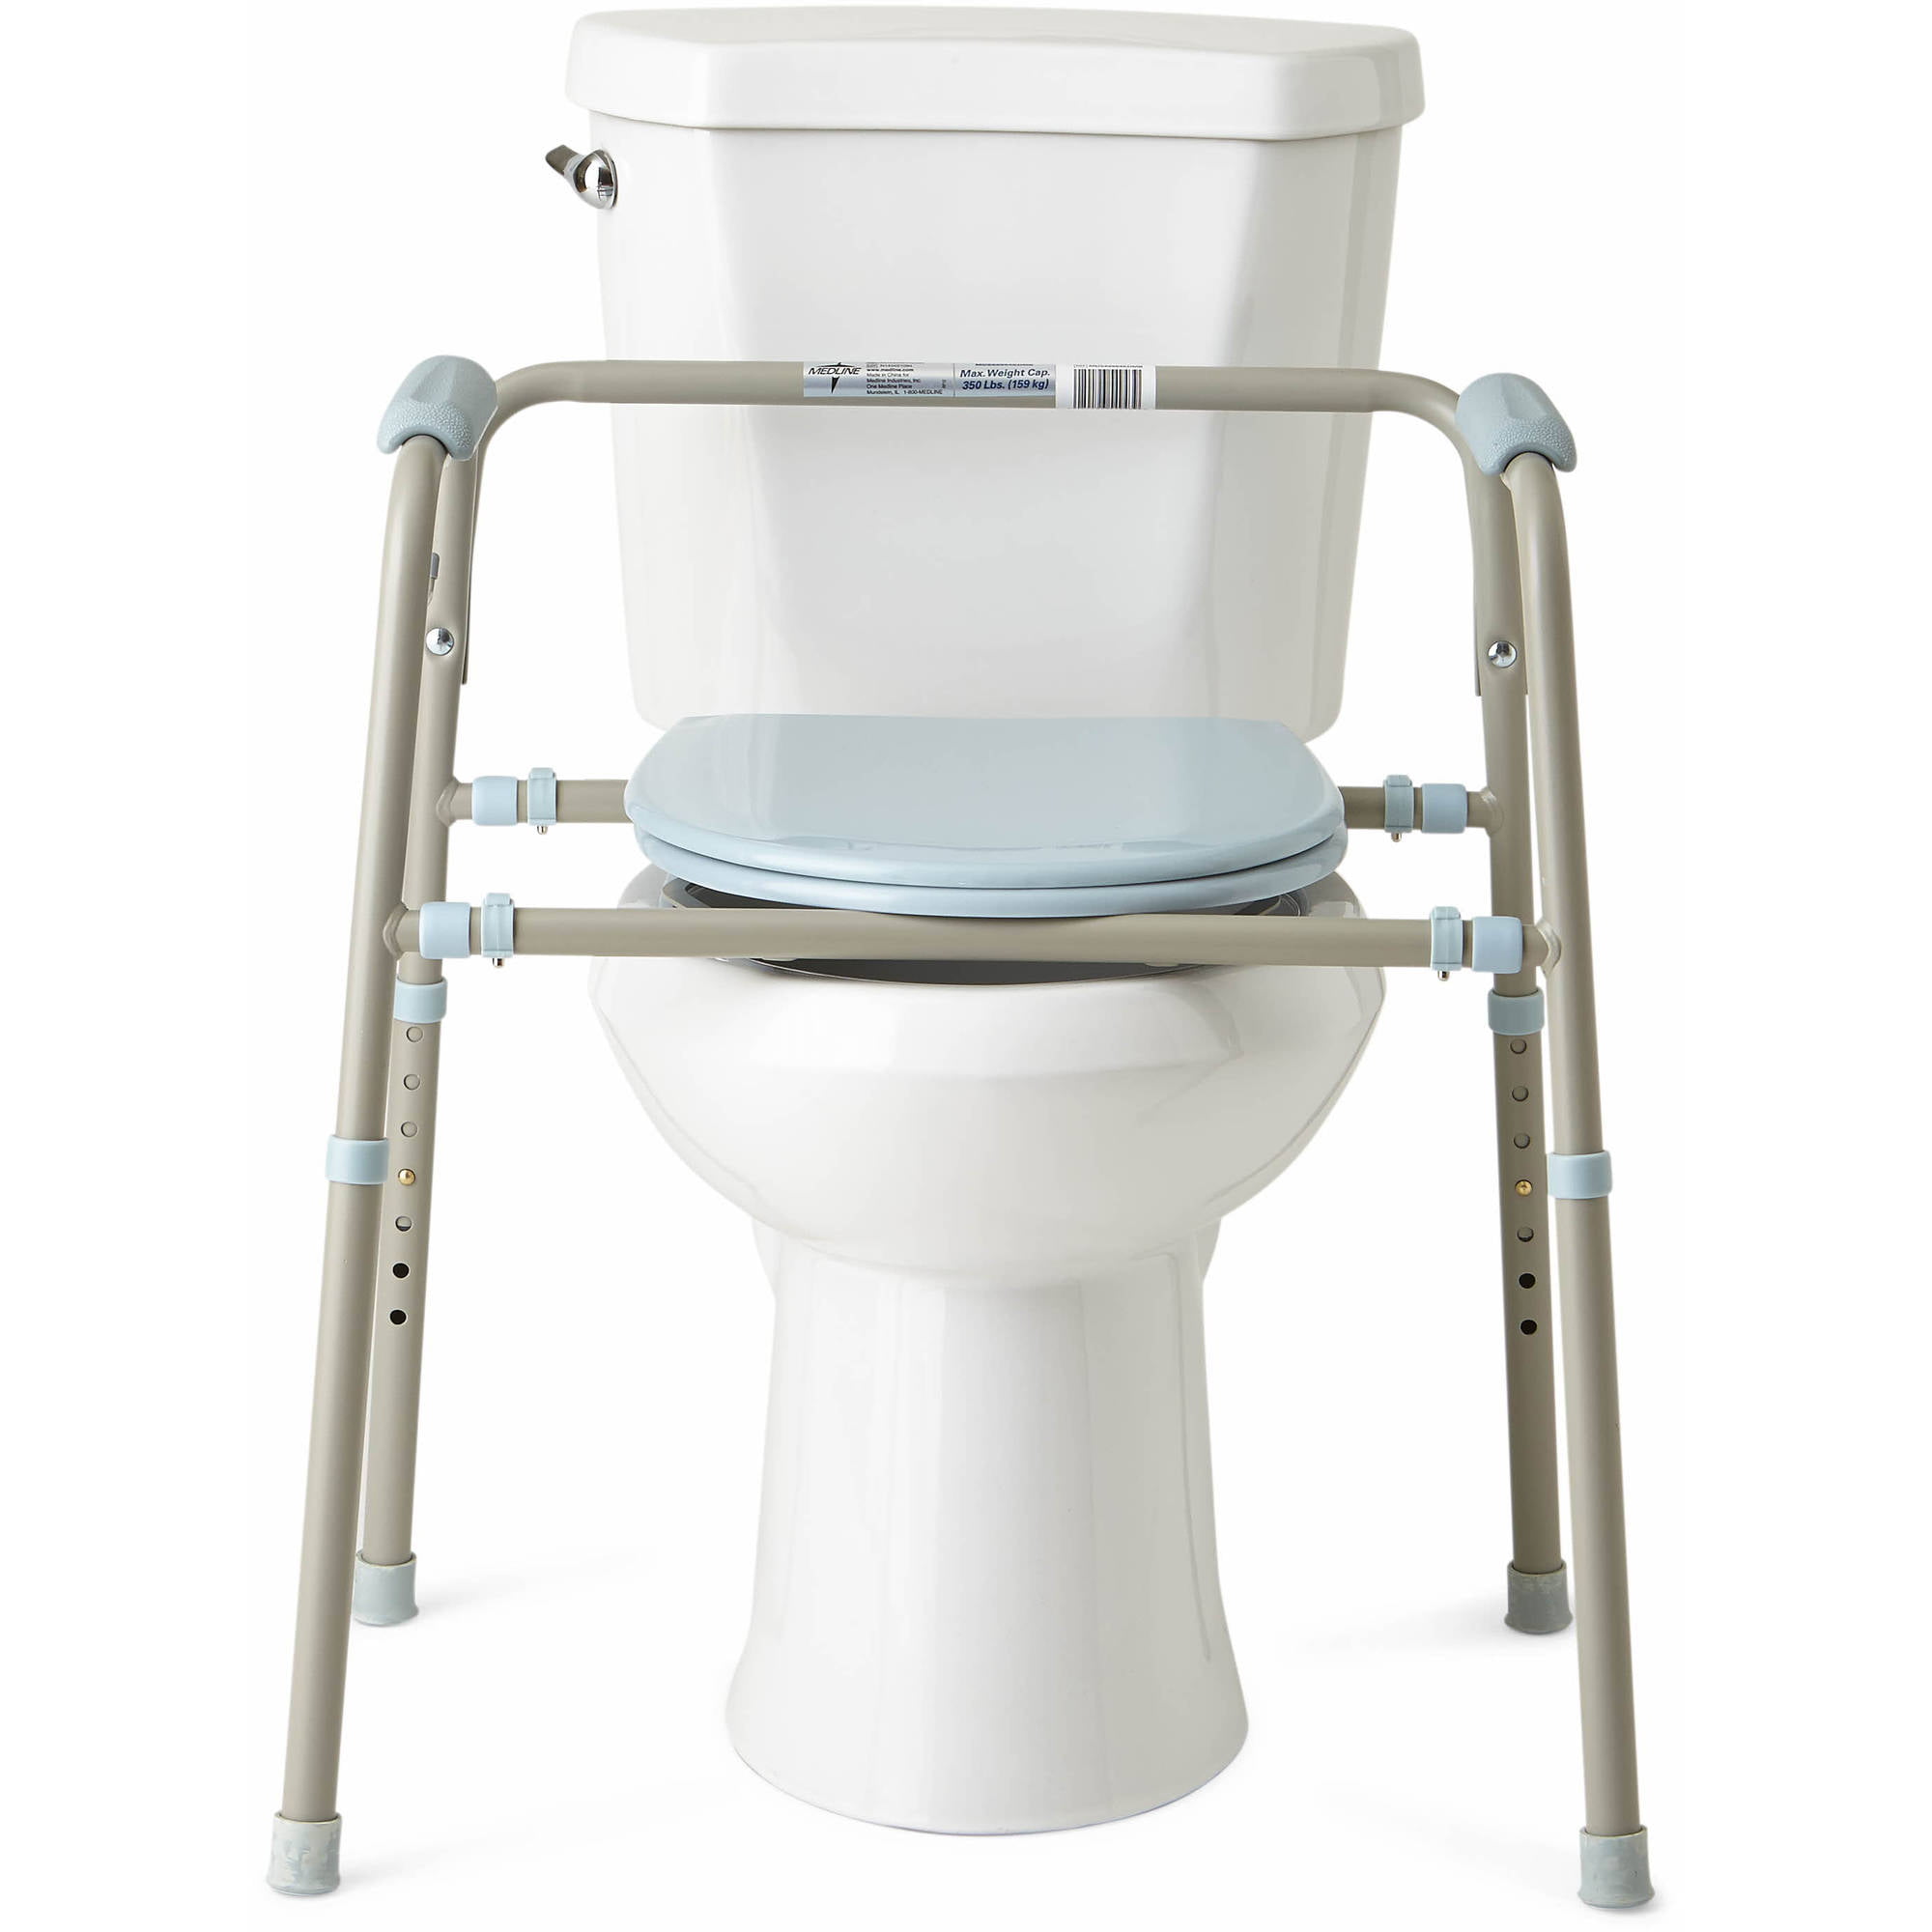 Bedside Toilet Commode Micro Ban 3 In 1 Steel Chamber Pot Collapsible